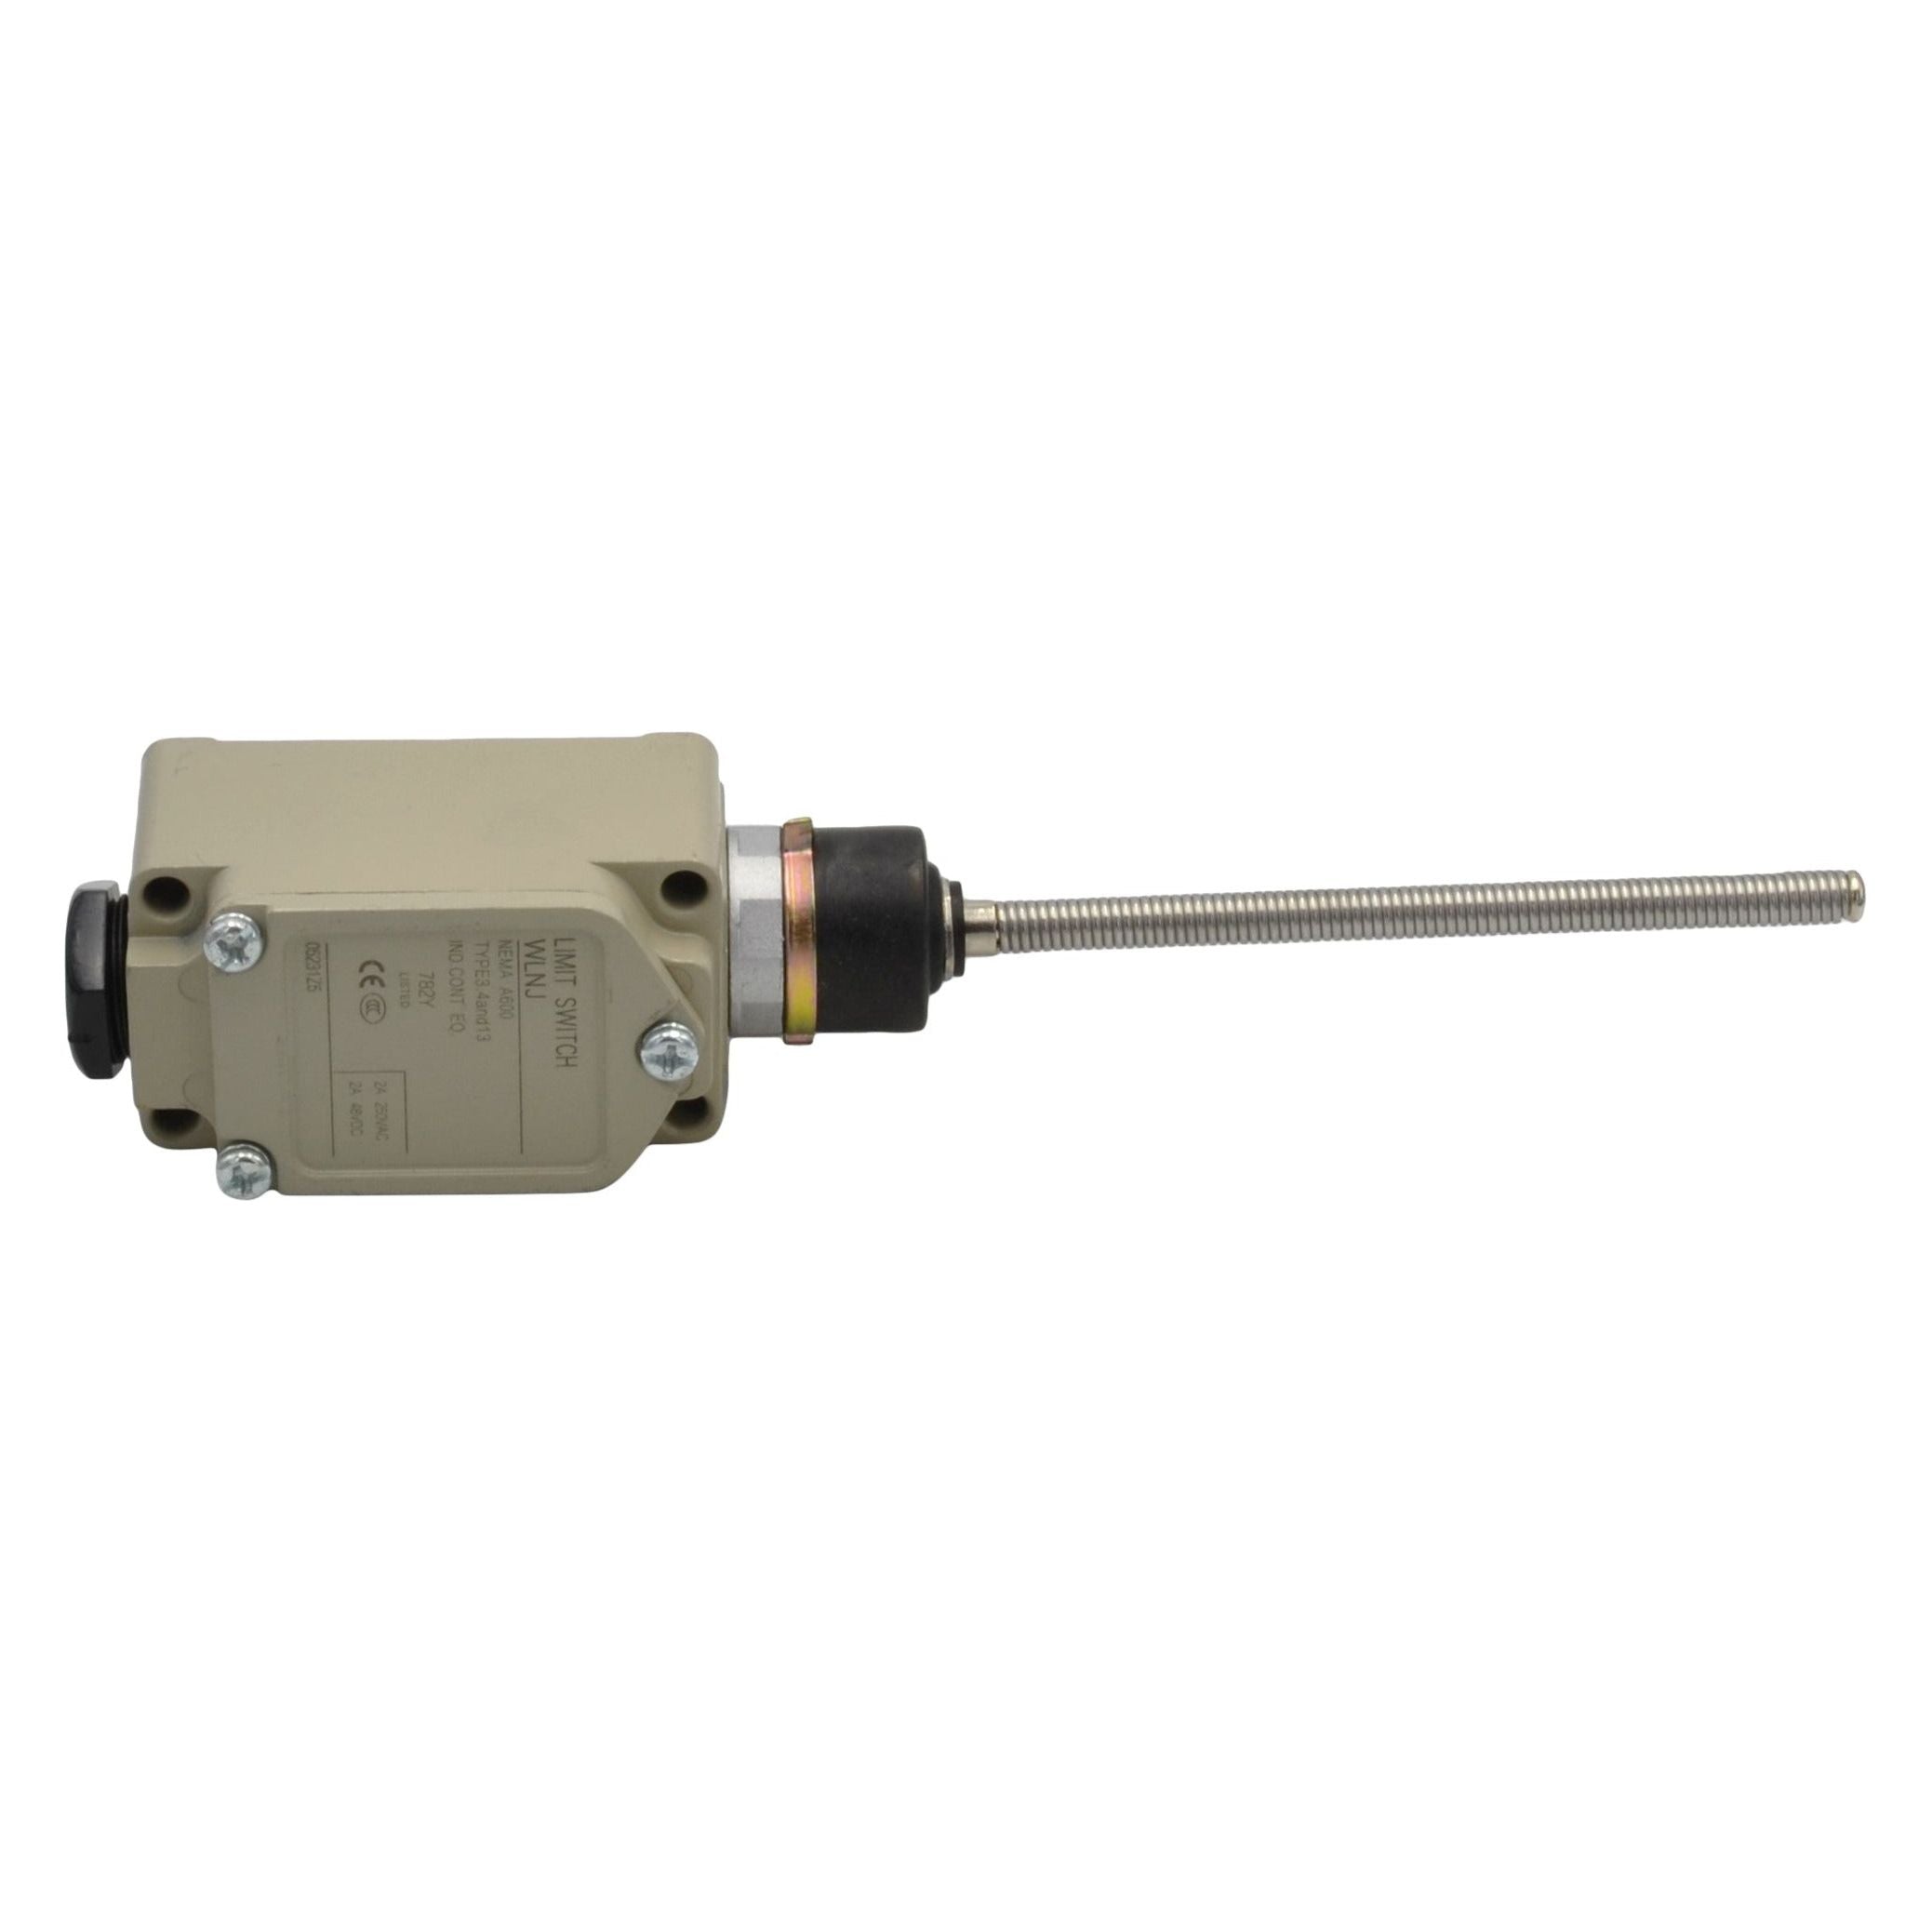 WLJN Stainless Steel Spring Limit Switch